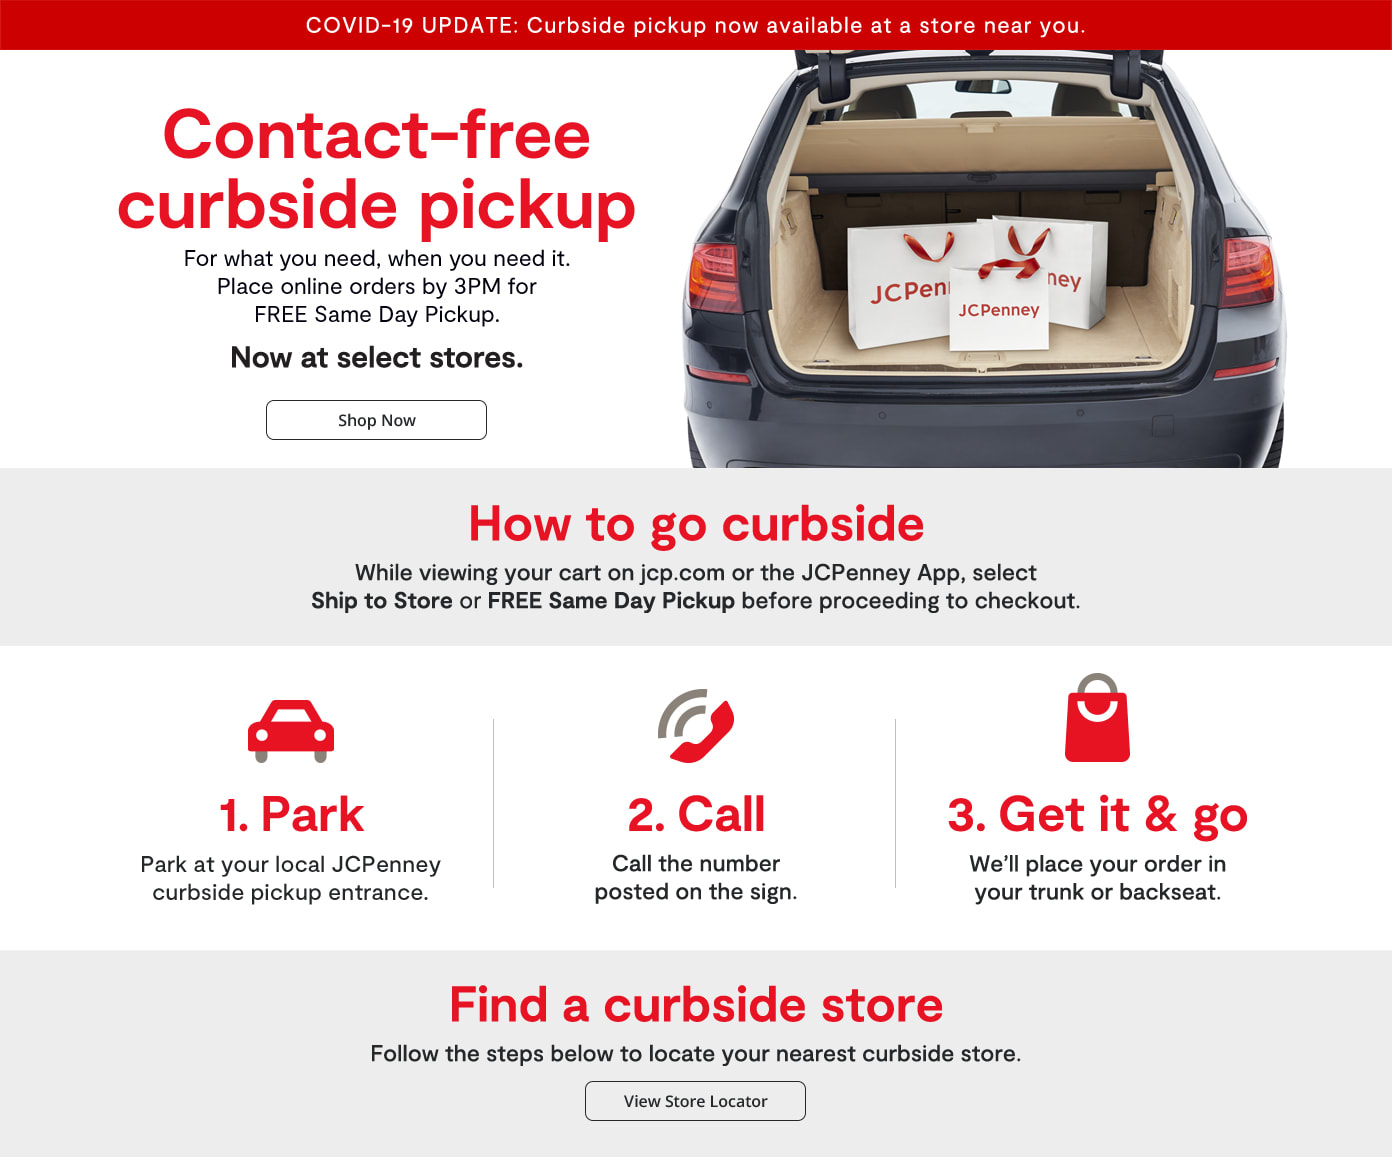 contact-free-curbside-pickup-for-what-you-need-when-you-need-it-place-online-orders-by-3pm-for-free-same-day-pickup-park-call-get-it-